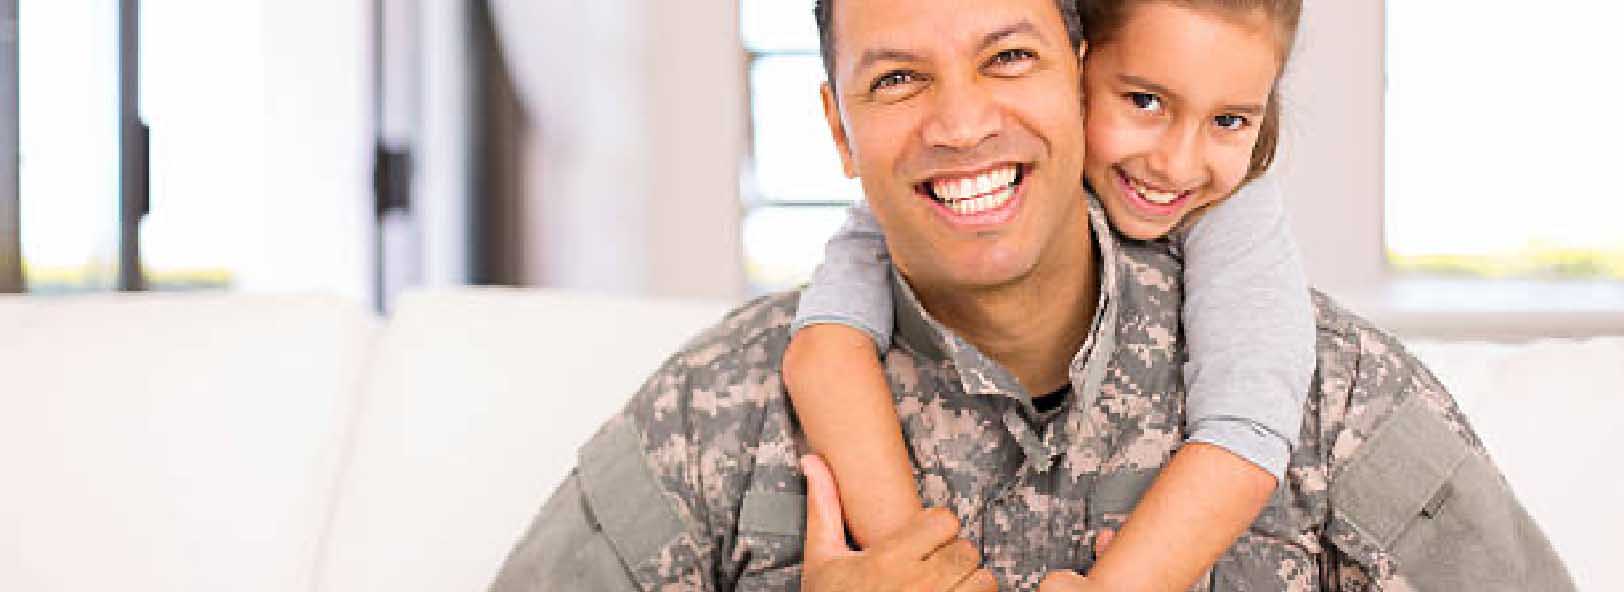 Male service member poses with child on his shoulders.